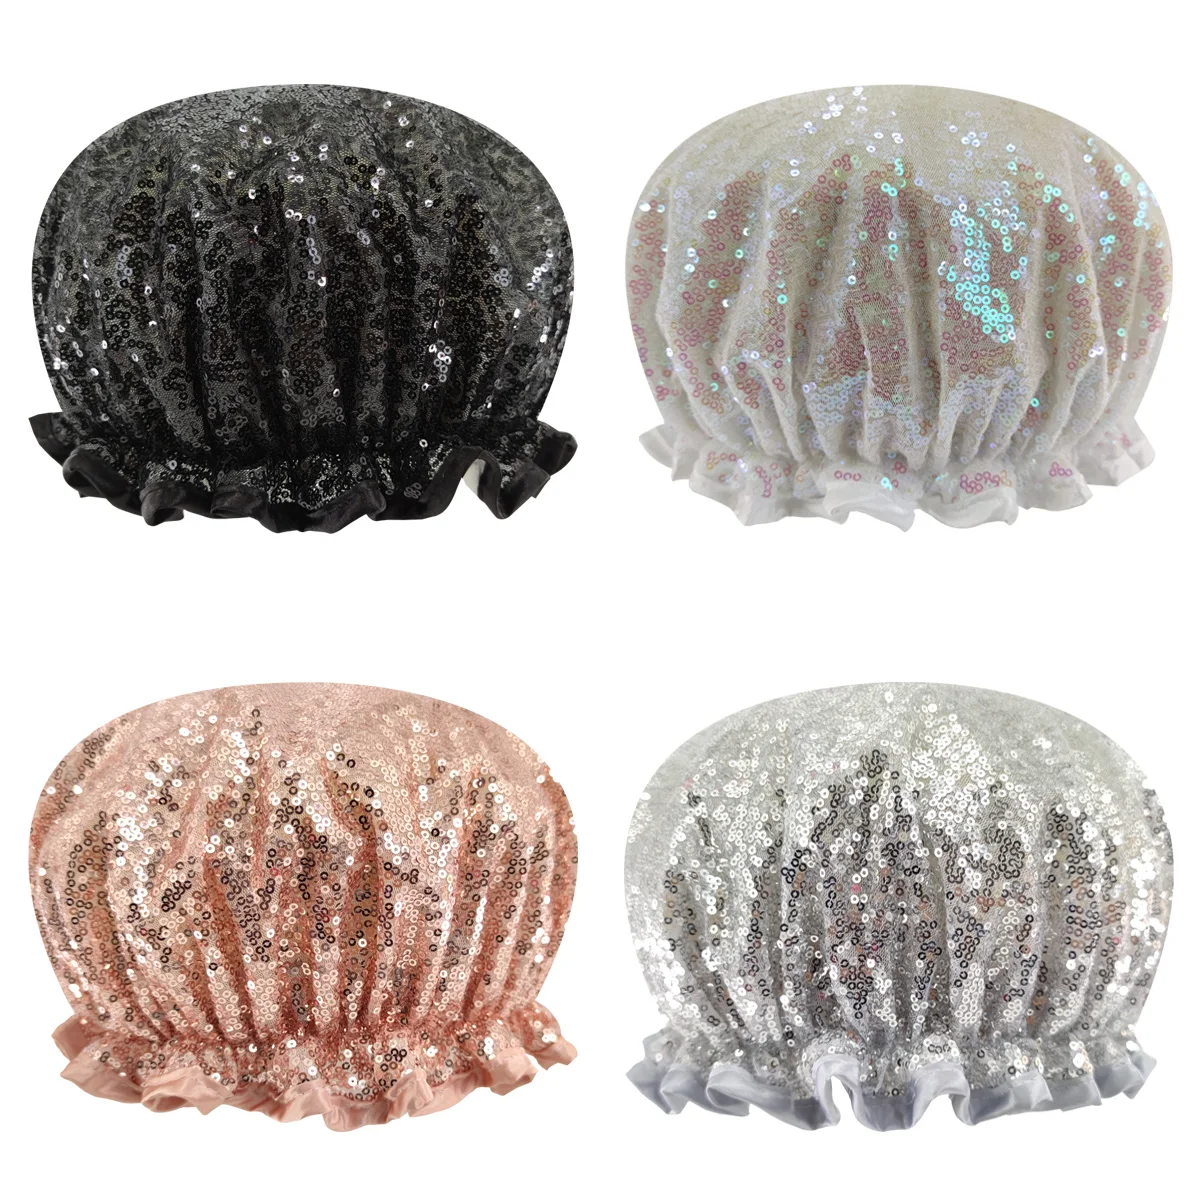 Exceyes luxury glitter shower cap for women-Waterproof, Fashionable, Reusable Shower Cap for Long Hair